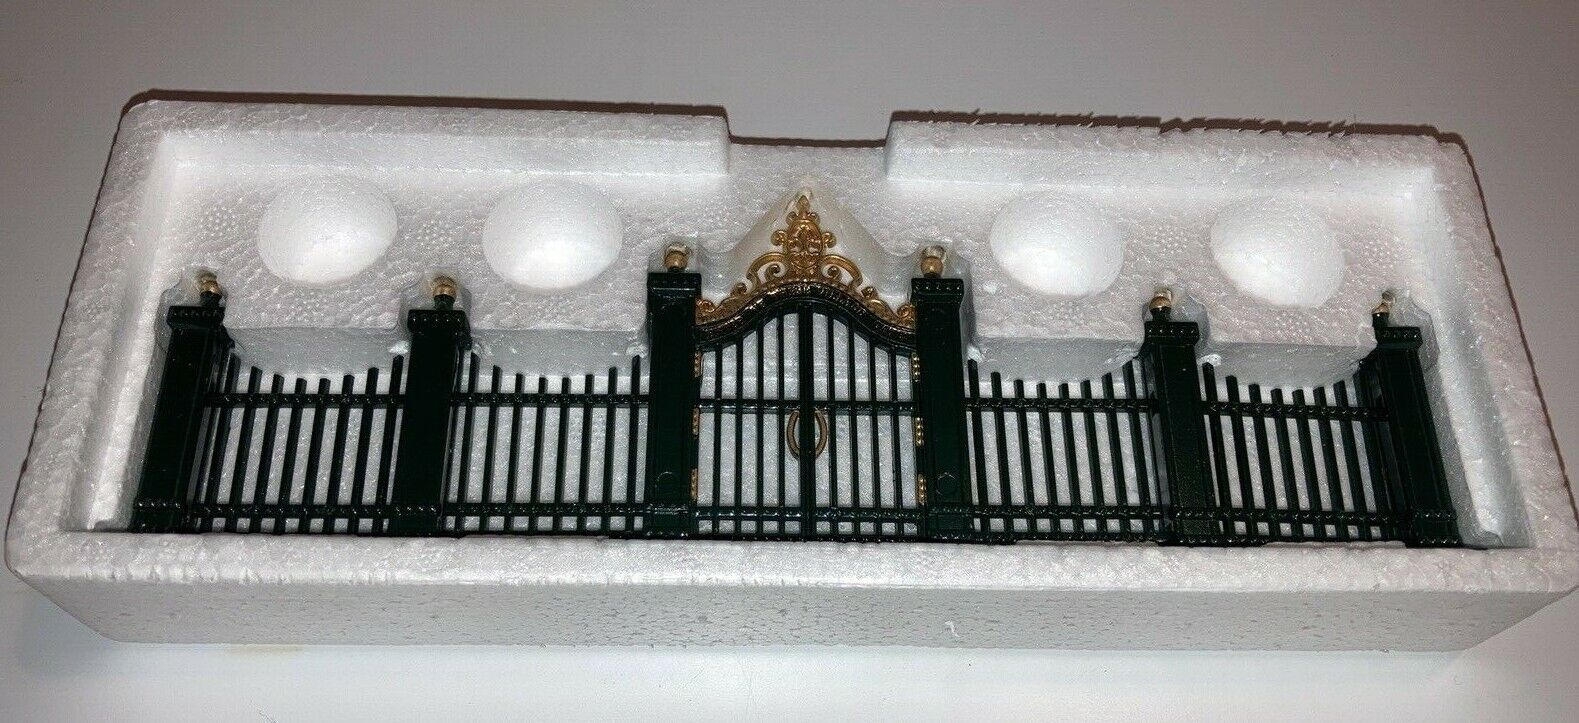 Department 56 Heritage Village Collection Wrought Iron Gate & Fence 5514-0 NEW